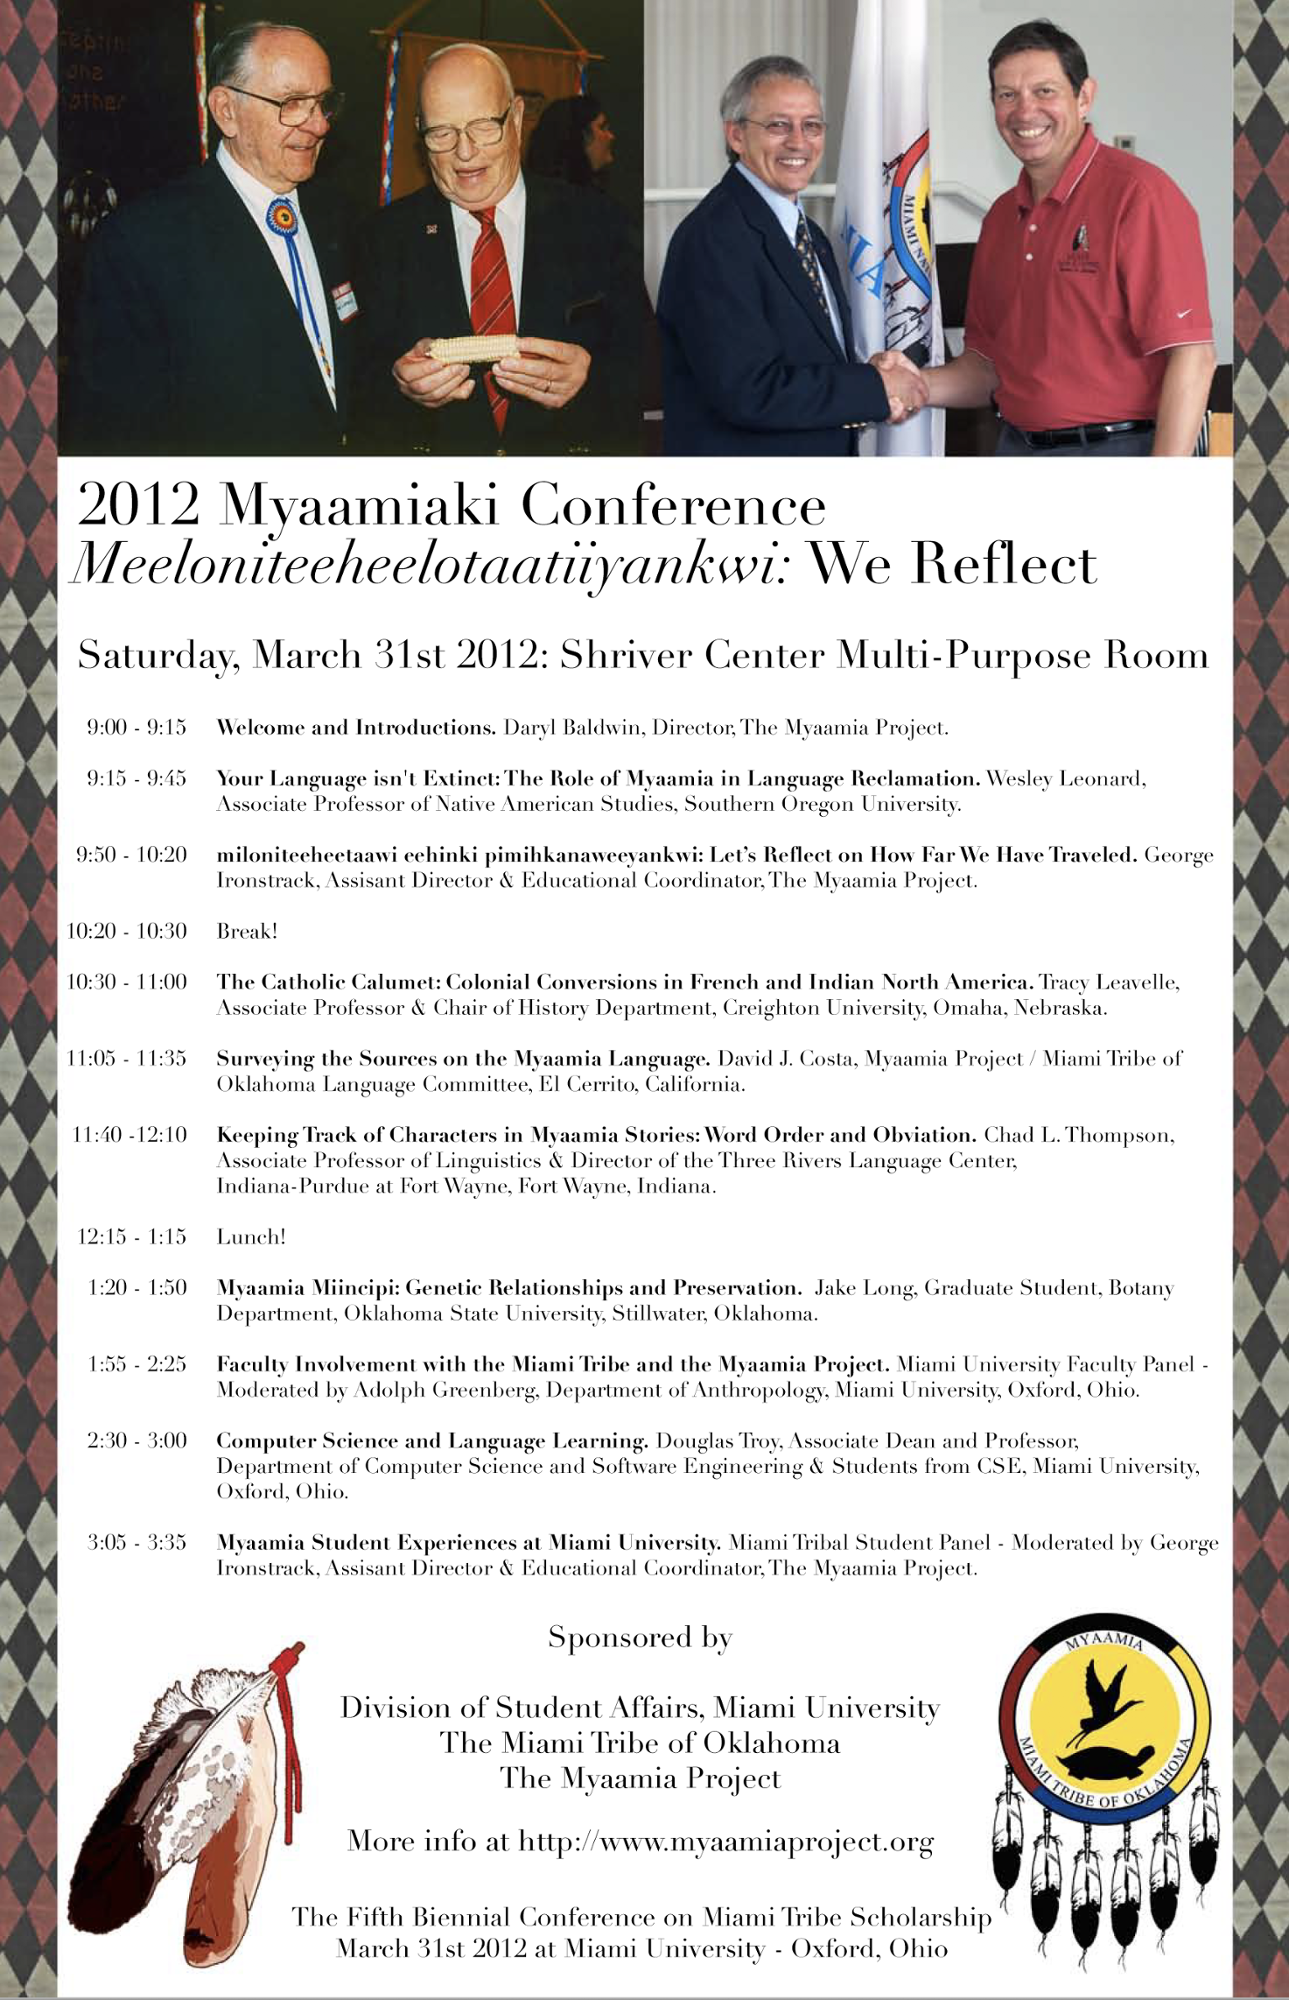 2012 Myaamiaki Conference Promotional Poster, including speakers, conference information, and theme.